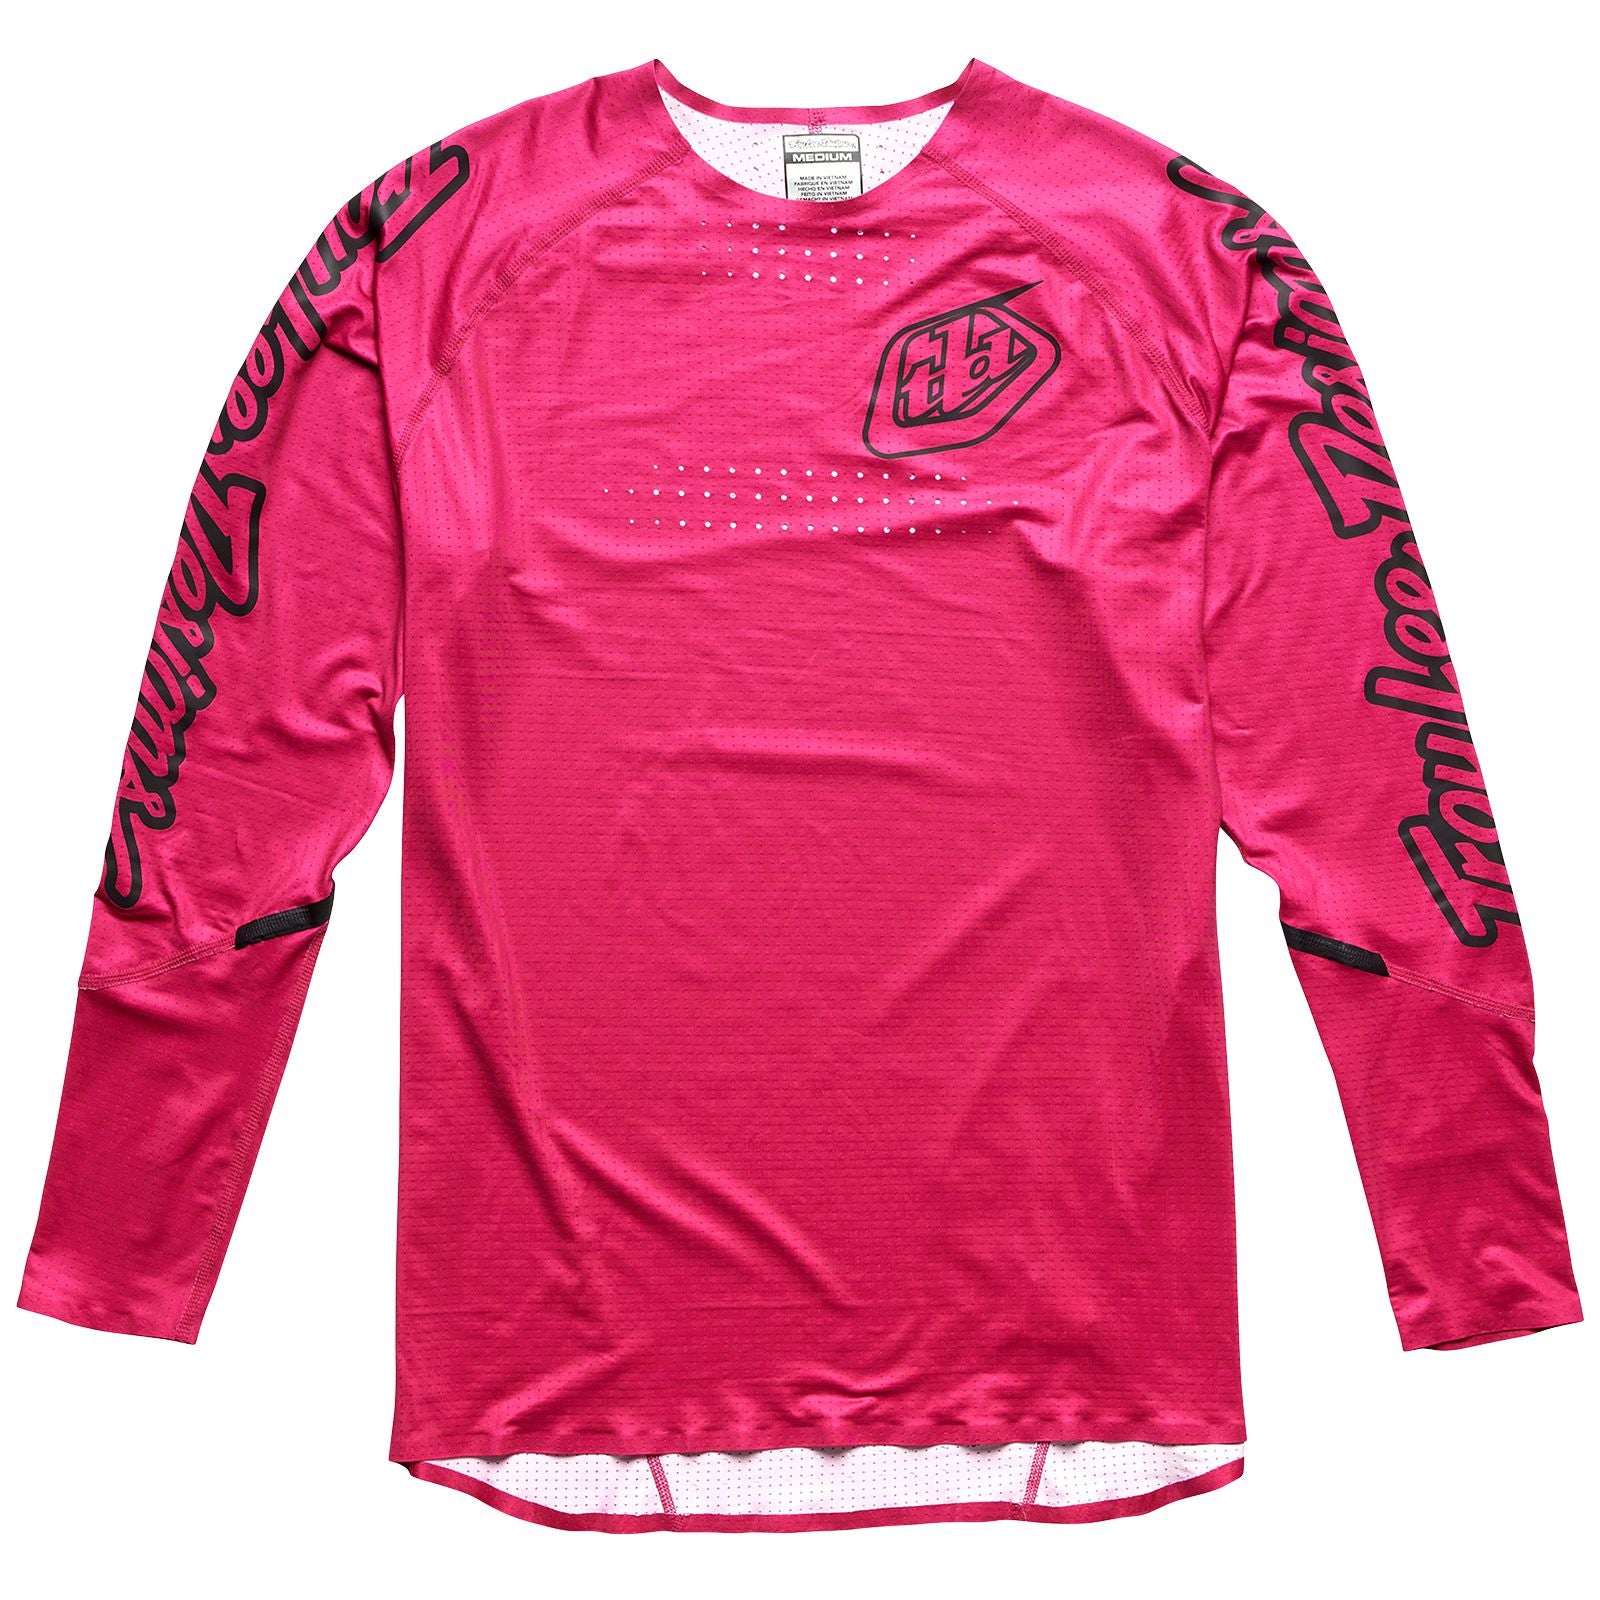 Troy Lee Designs Sprint Ultra long sleeve jersey - pink.
Product Name: TLD Sprint Ultra Jersey Mono Berry